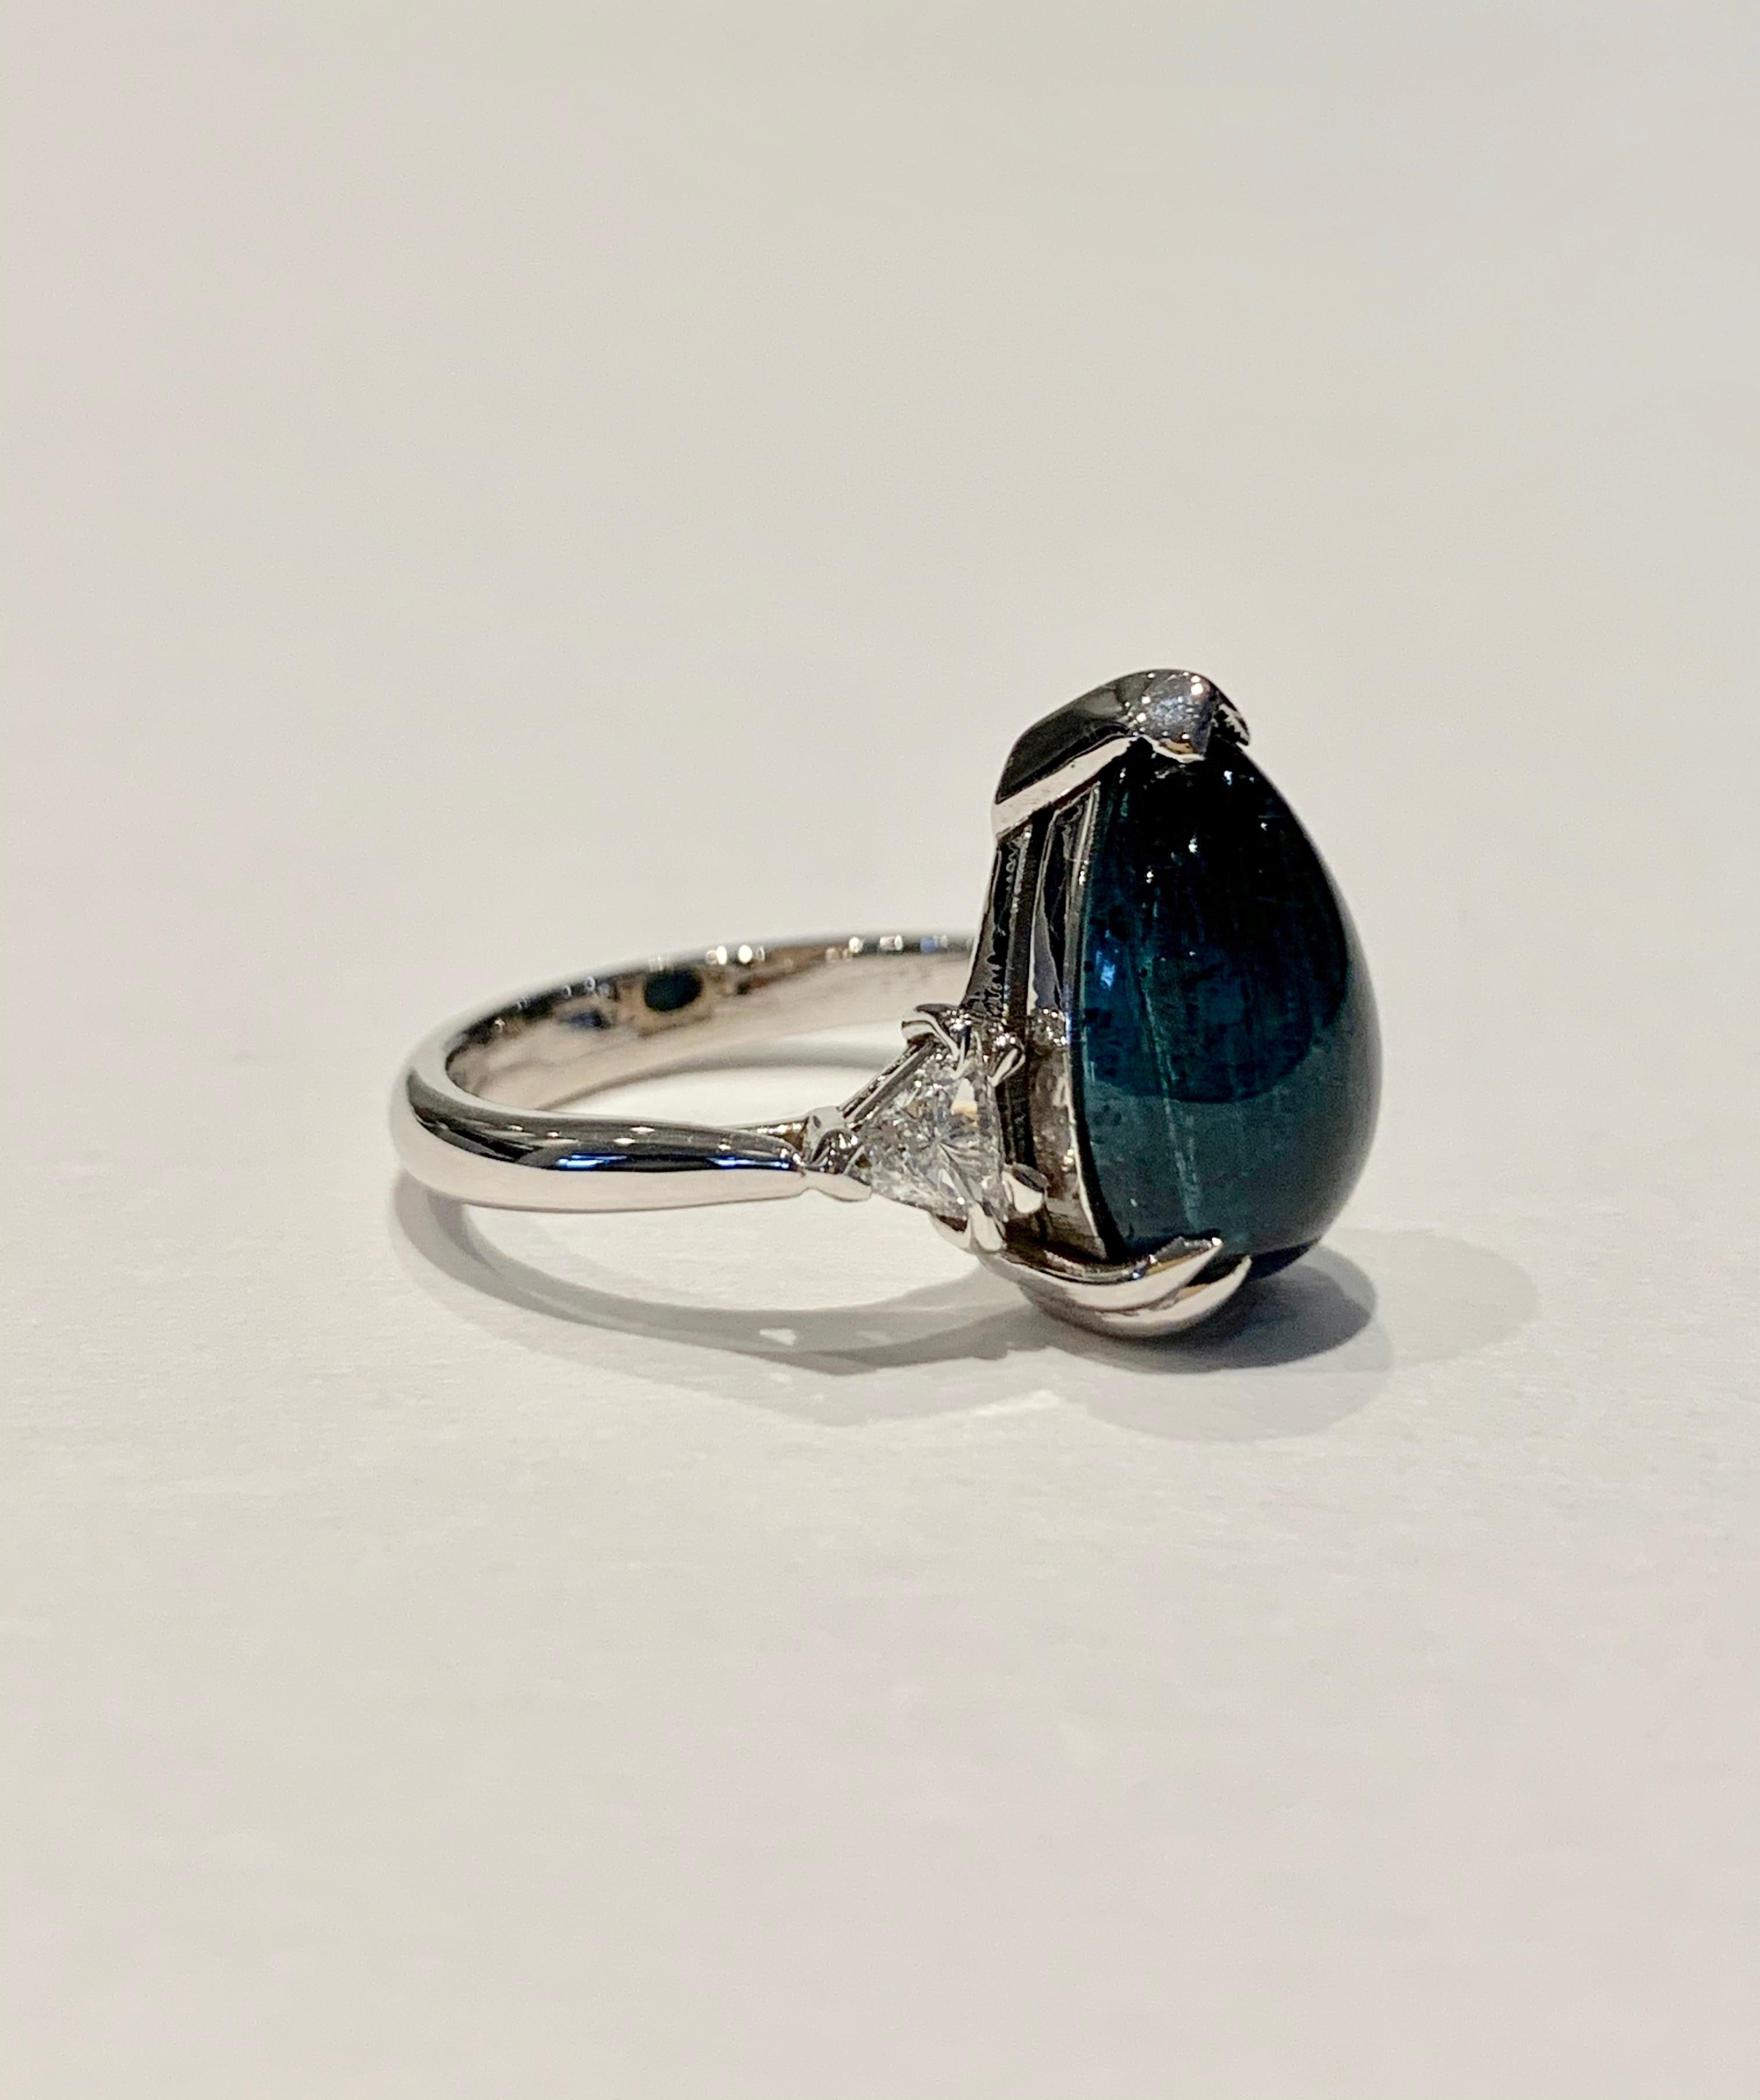 Bespoke 5.27ct Blue Tourmaline Pear Cut Cabochon Diamond Ring in 18ct White Gold For Sale 1